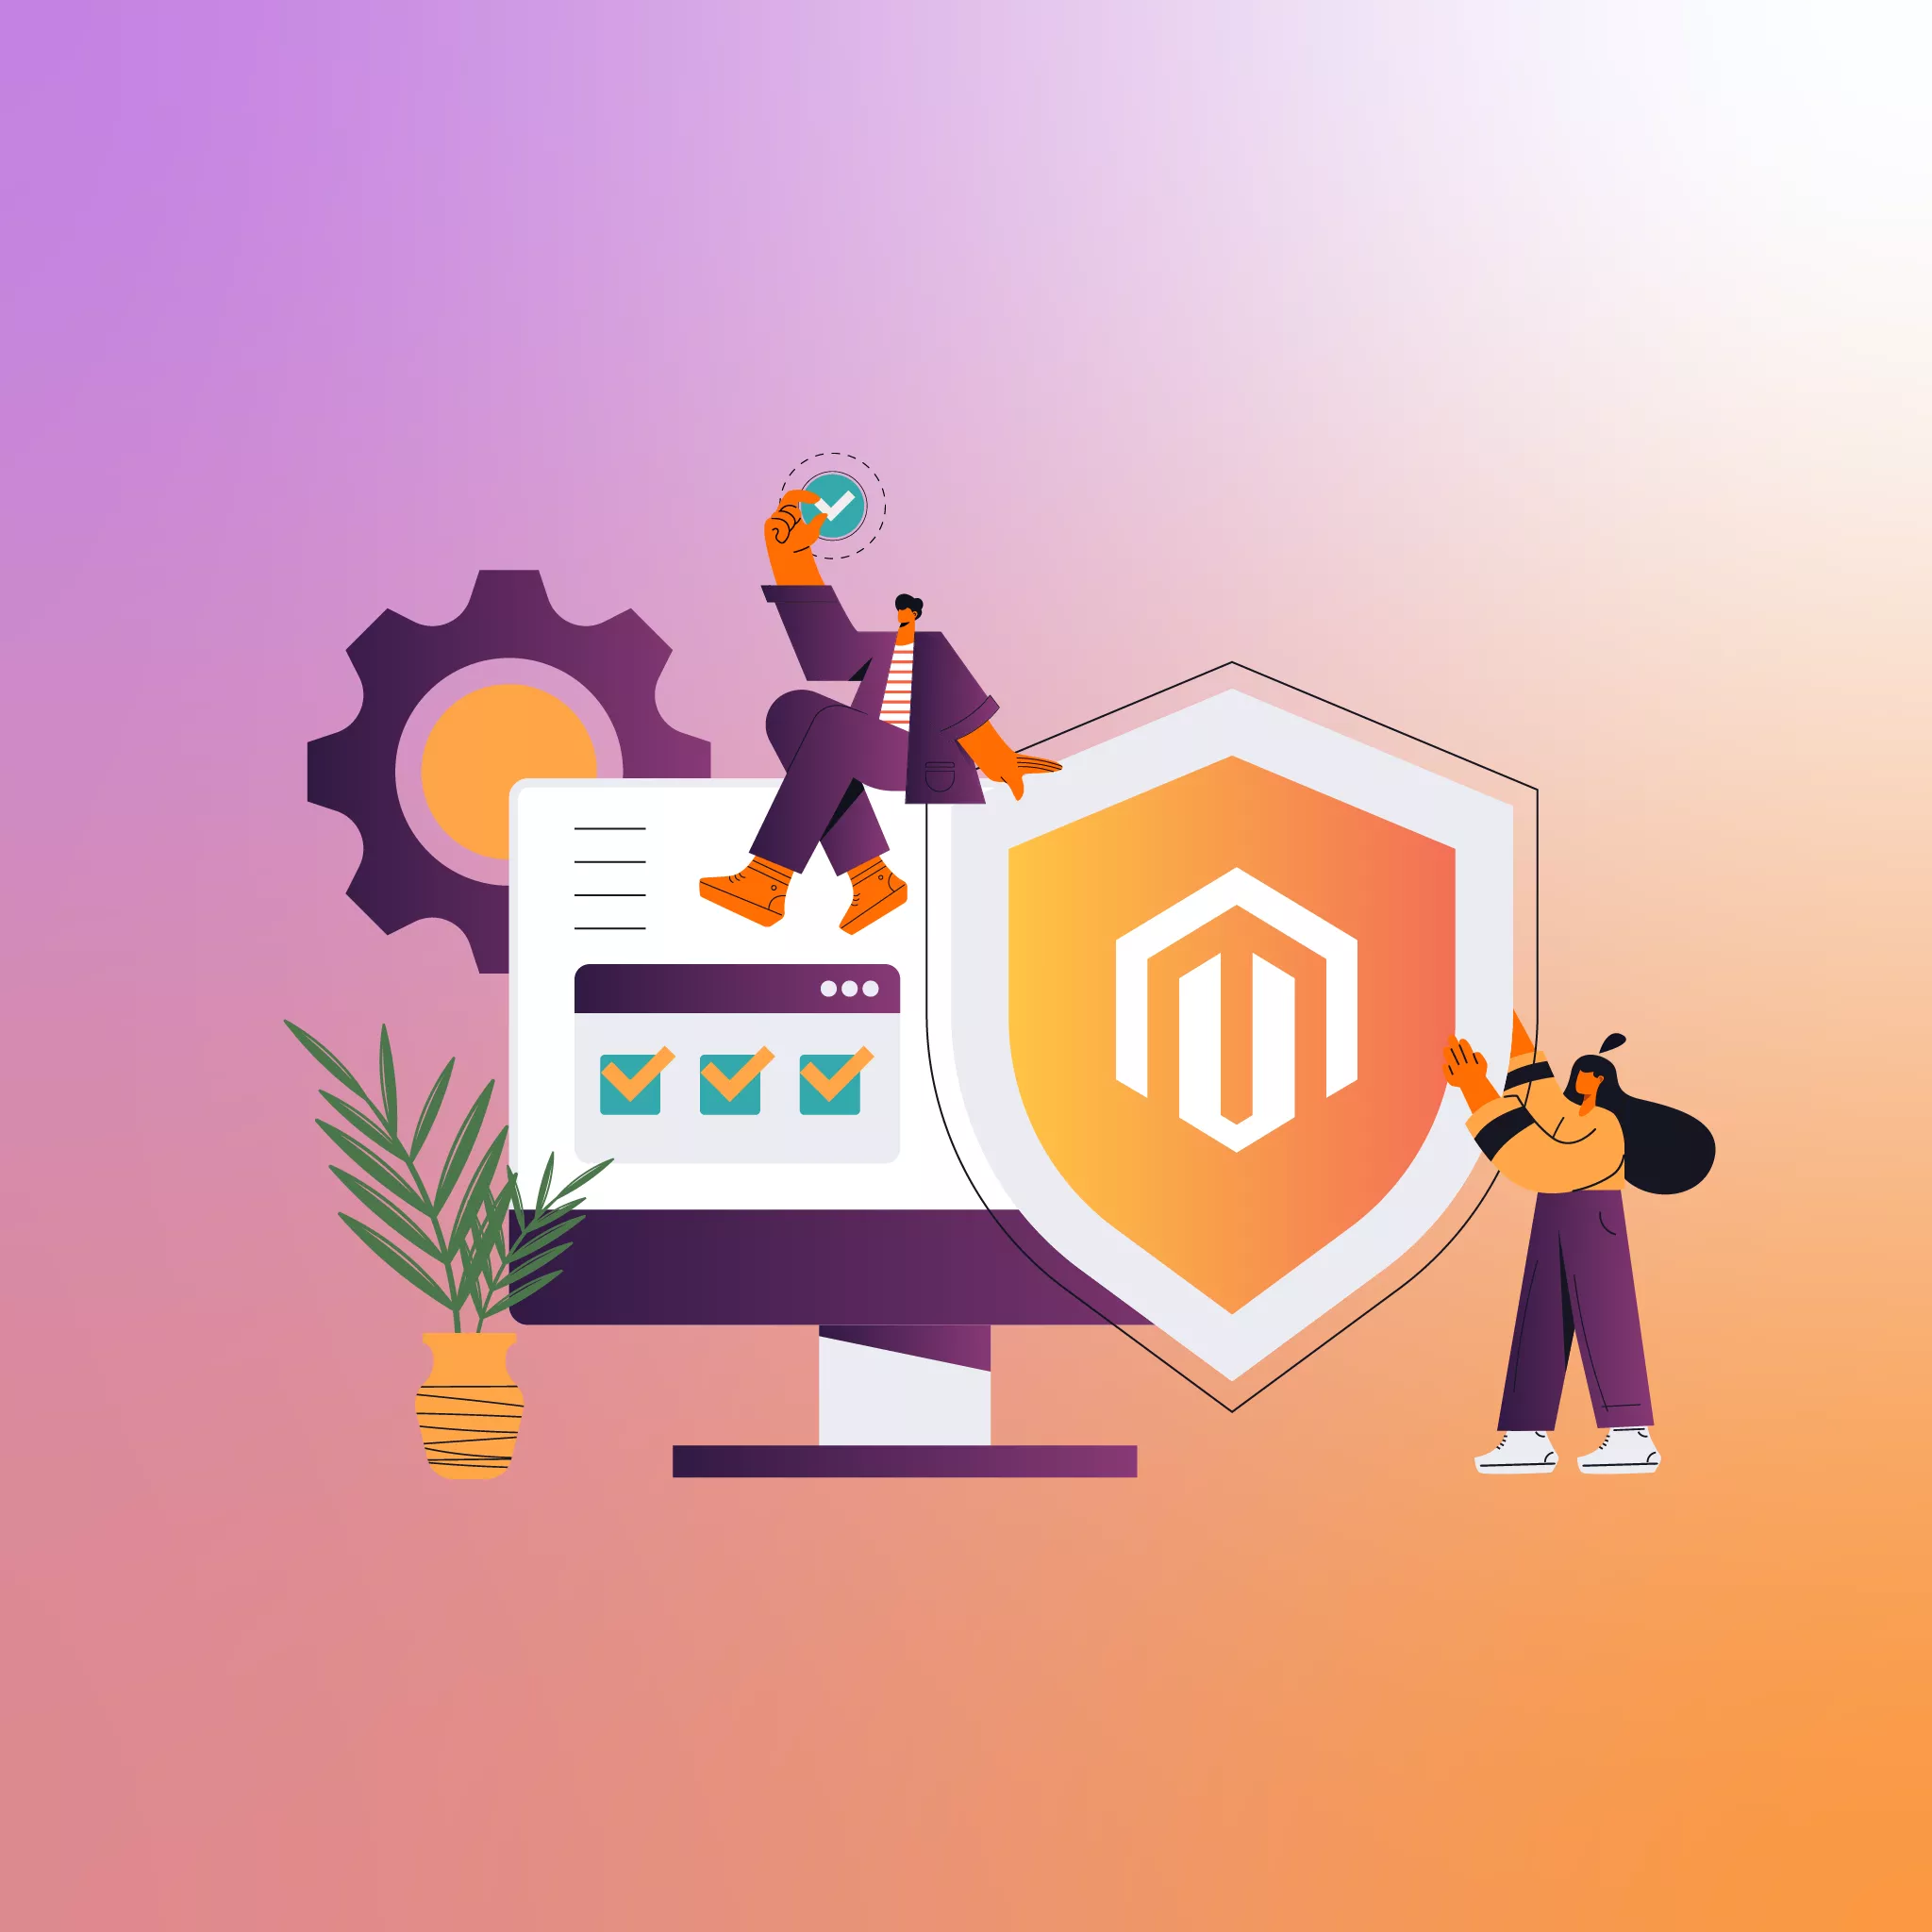 Team working on Magento 2 security extensions, showcasing a security shield with the Magento logo for enhanced online store protection.